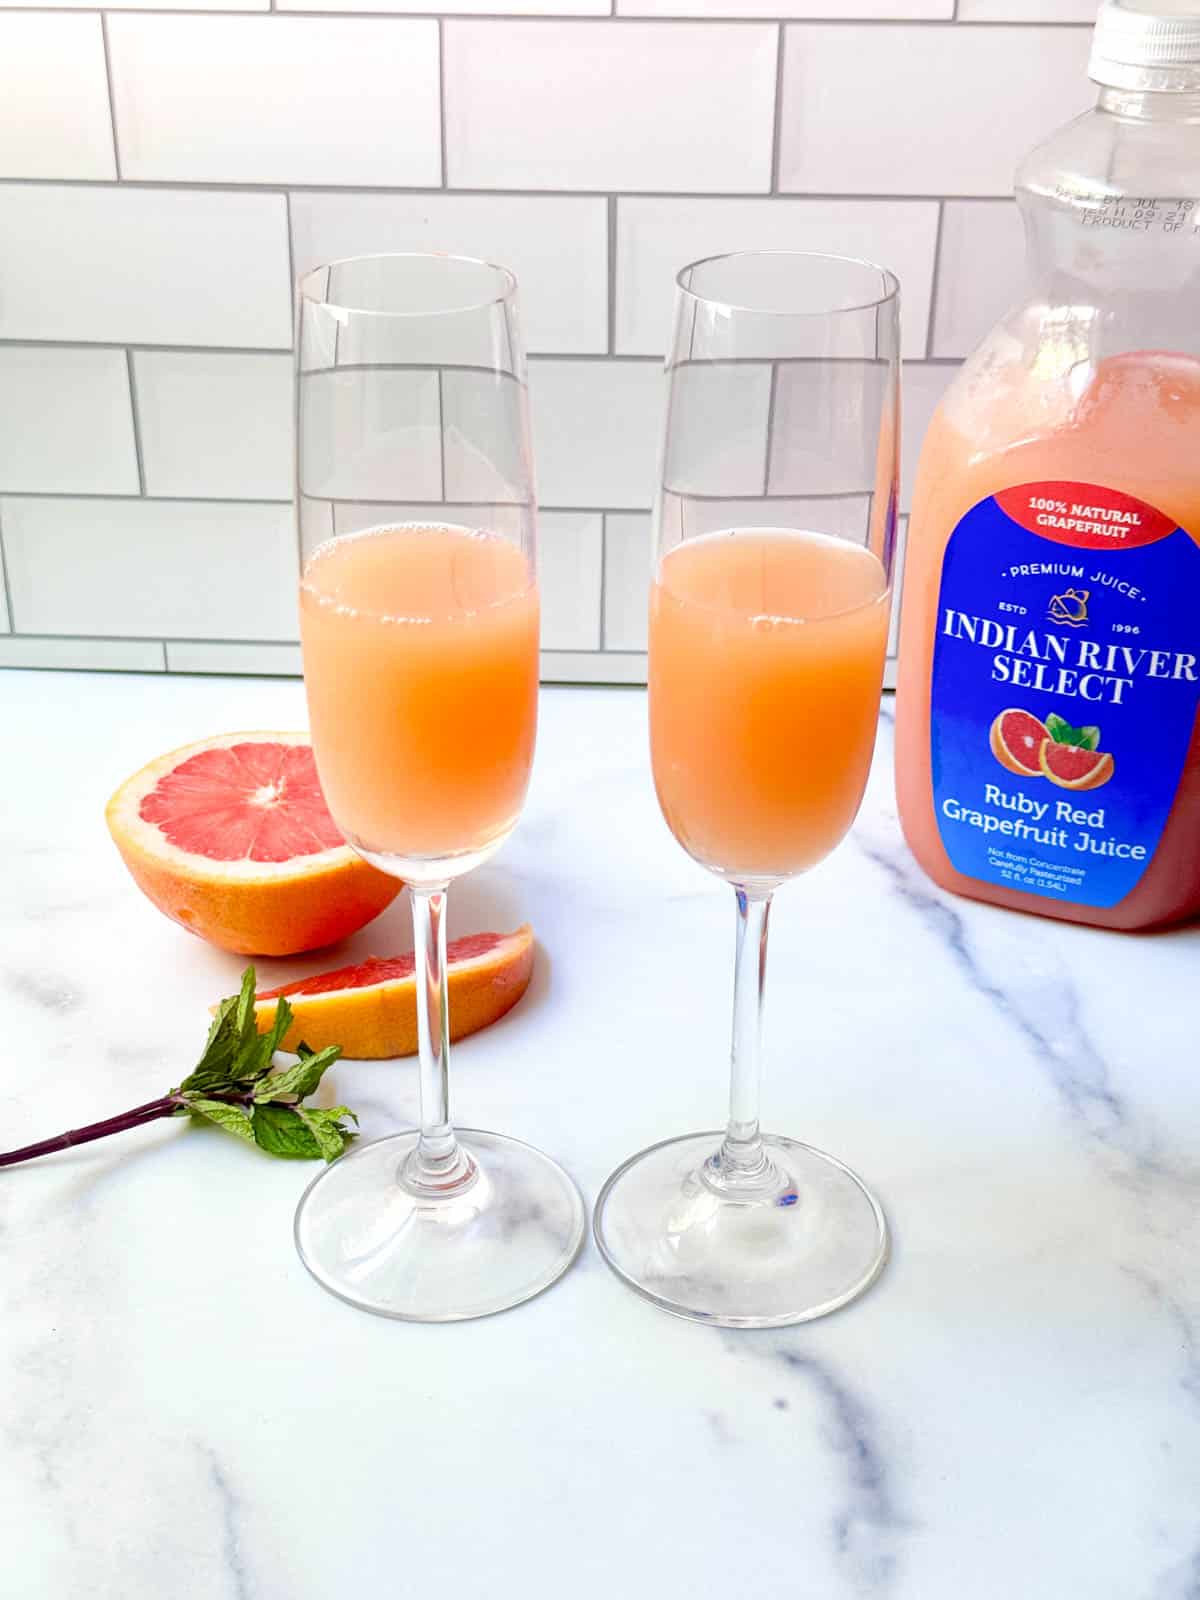 Grapefruit juice in a flute glass with fresh grapefruit, mint and a bottle of juice on a white counter.